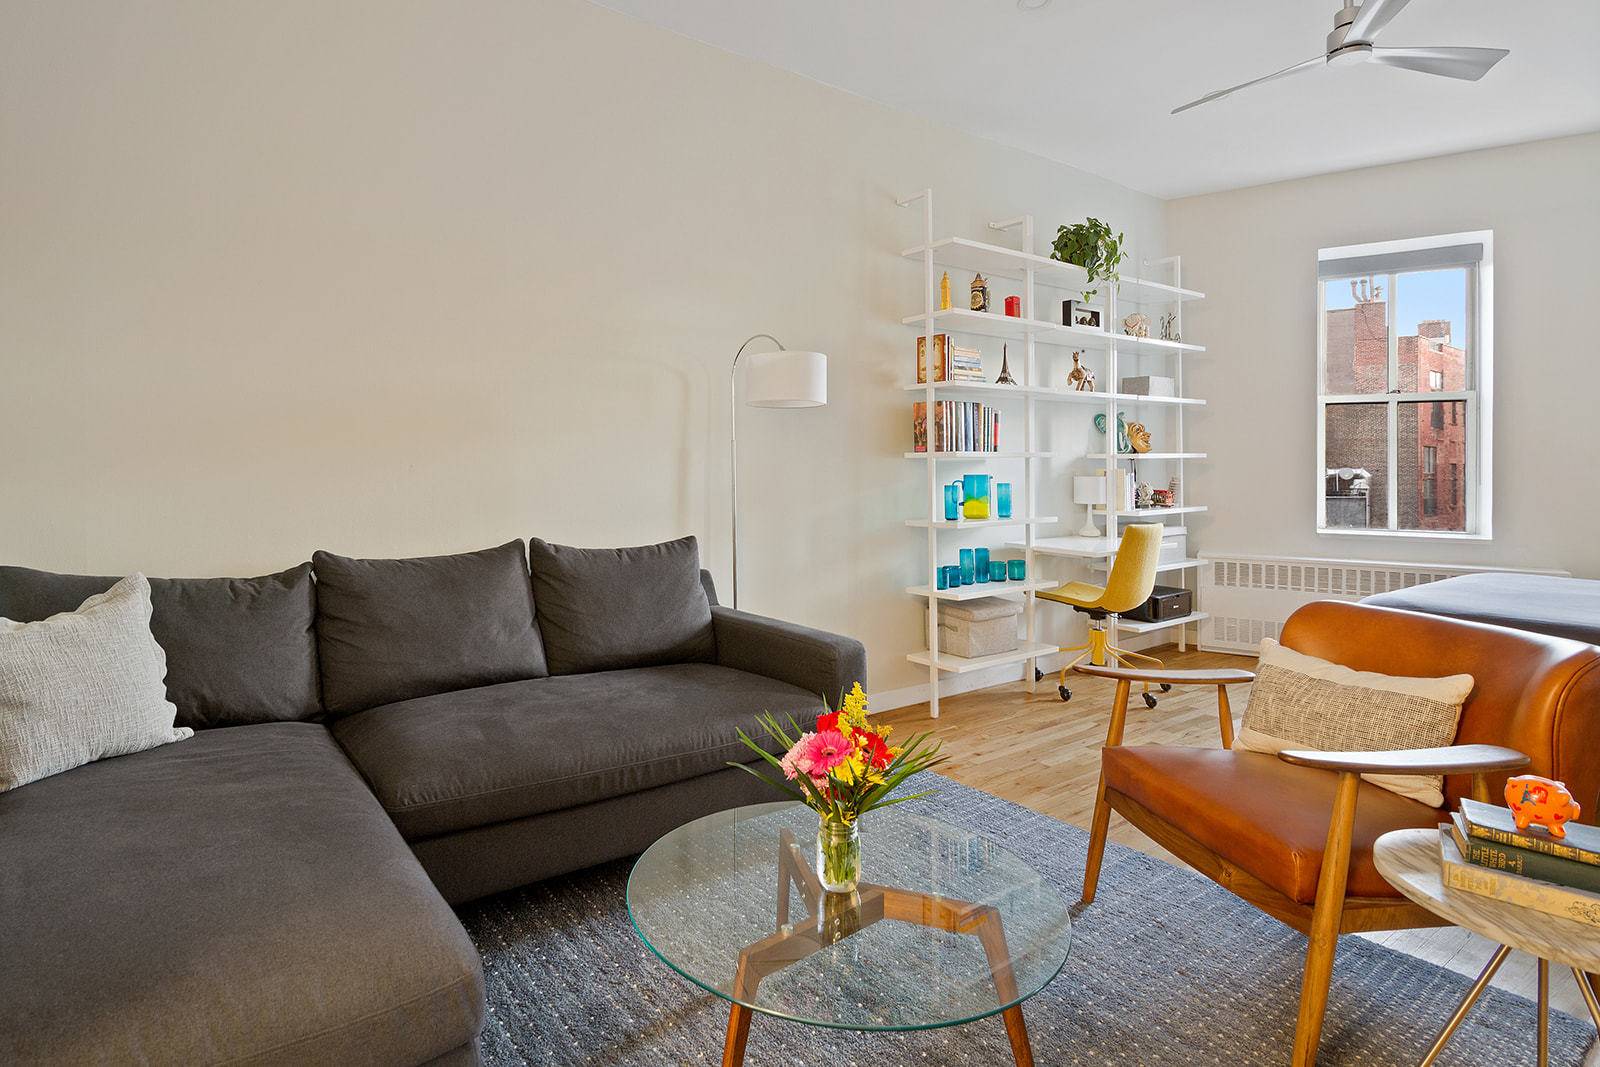 NEW PRICE for this sunny, south facing RENOVATED loft studio in the heart of the WEST VILLAGE.